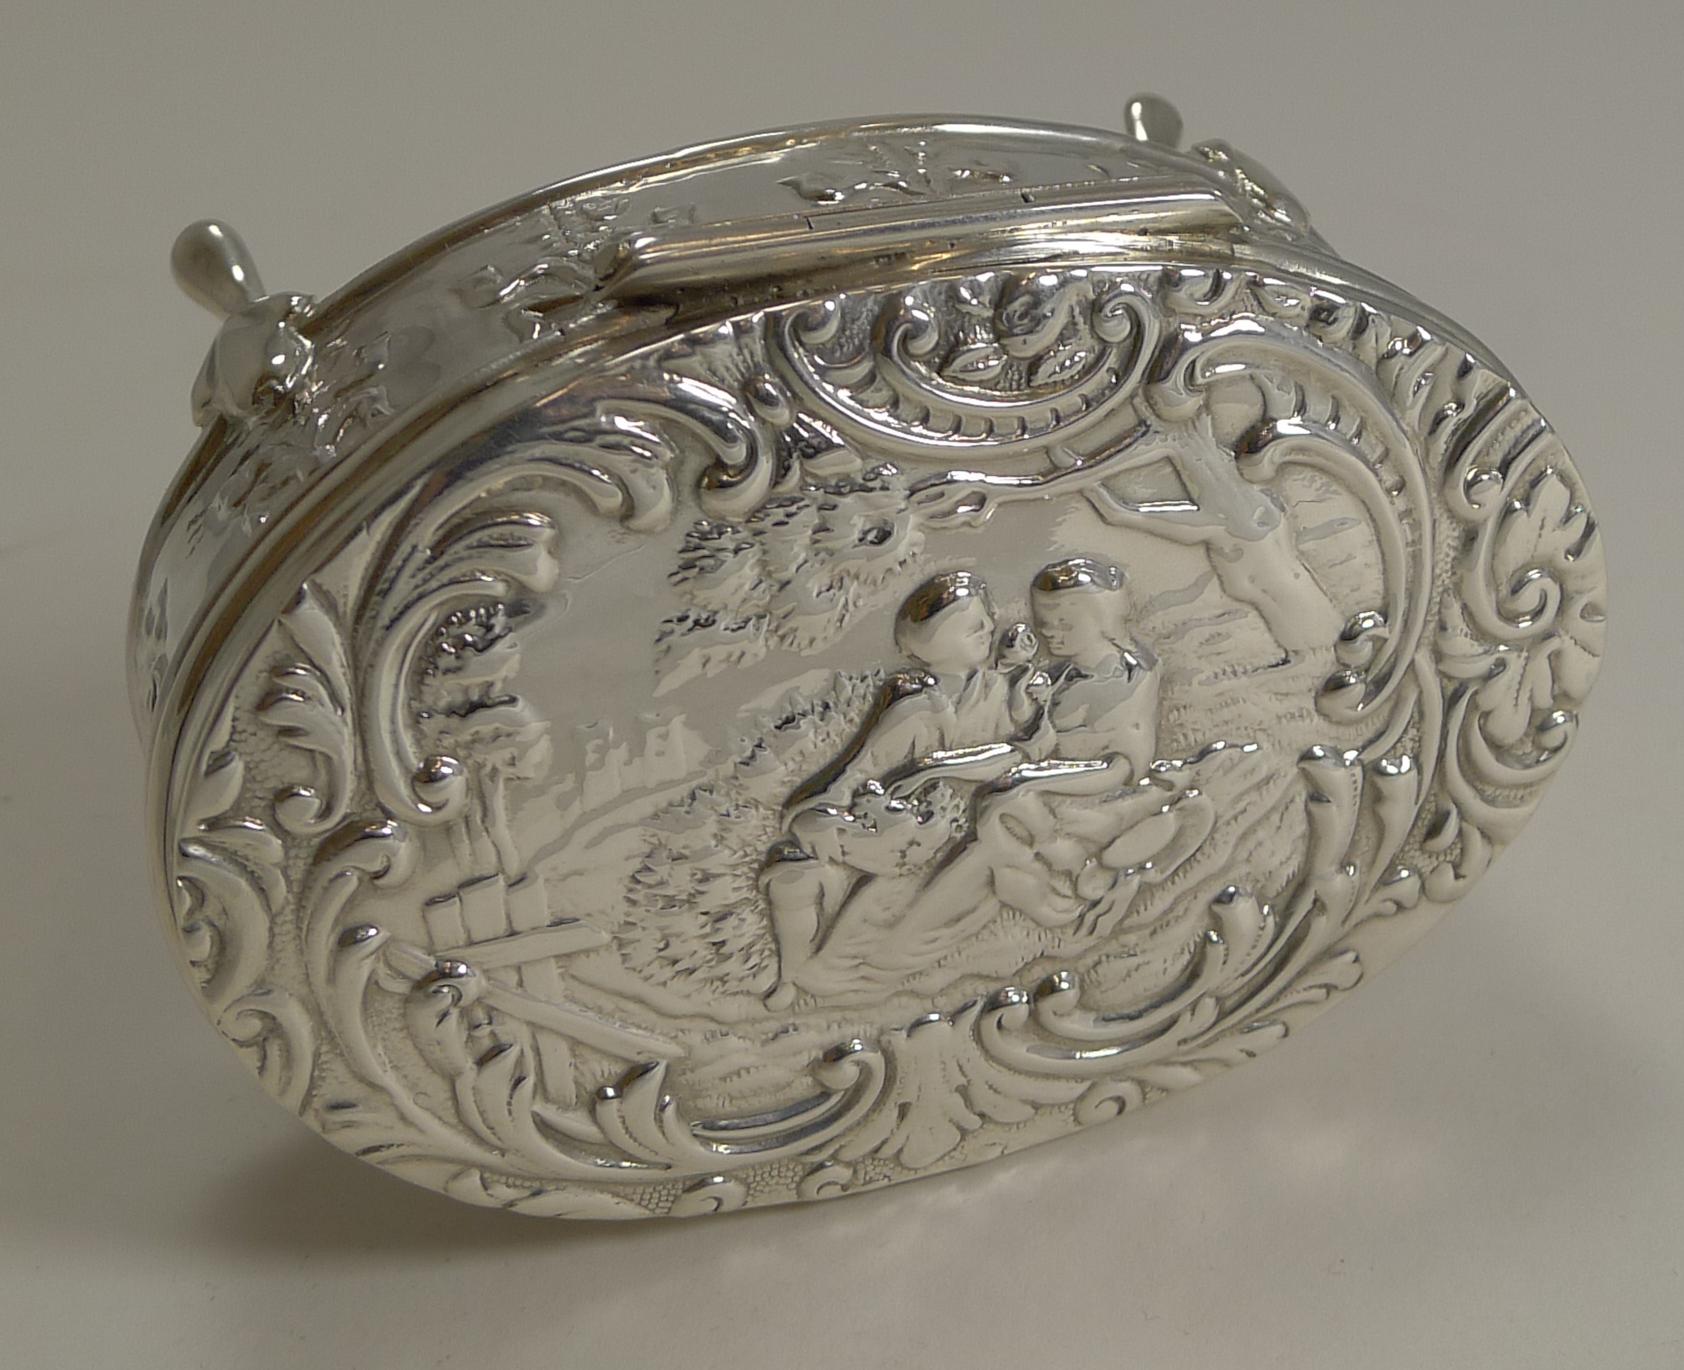 Pretty as a picture, this Edwardian oval sterling silver box stands on four elegant legs. The sides have an embossed or repousse decoration featuring a series of ribbon and bow motifs.

The lid is beautifully decorated with a romantic courting